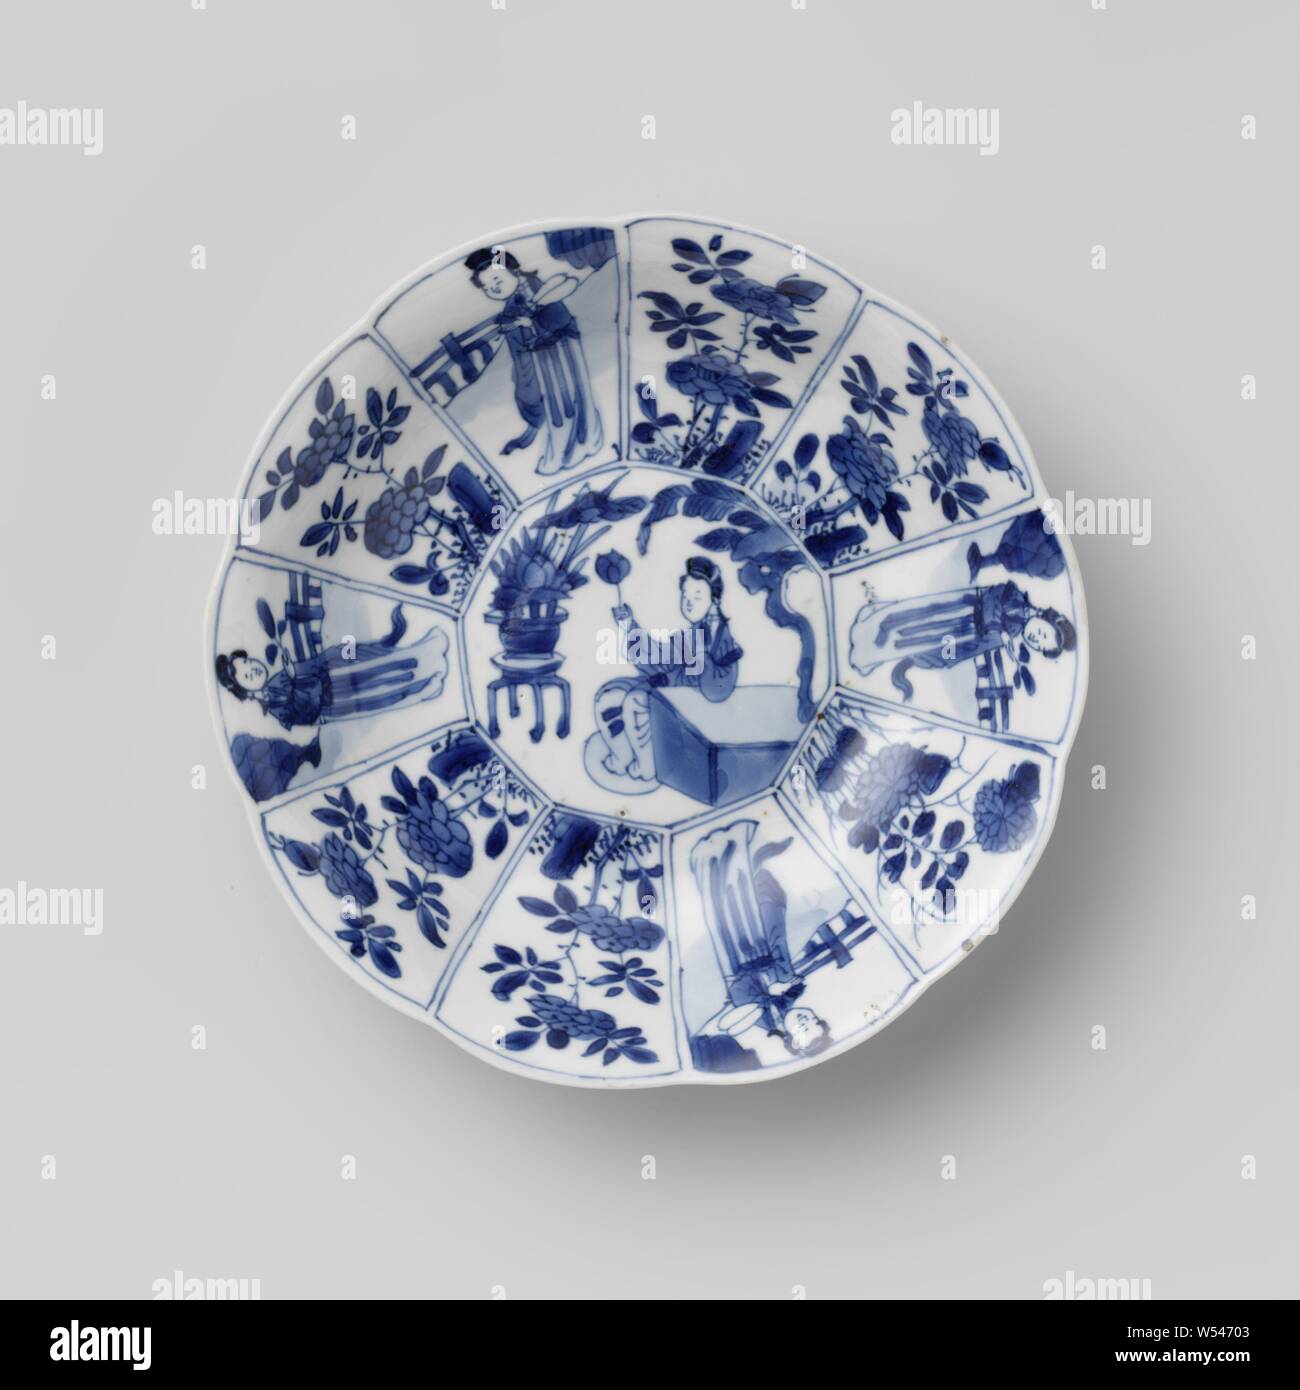 Saucer dish with Chinese ladies in a fenced garden and flowering plants, Porcelain dish with lobed edge, painted in underglaze blue. The wall is modeled in ten compartments. On the shelf a ten-sided medallion with a Chinese lady (long list) sitting at a table with a lotus flower in her hand, behind her a lotus in a pot on a stool. The wall is divided into ten radiating compartments with alternately a lady with a fan or a branch in an enclosed garden or flowering plants. The outer wall with a continuous flower branch. Marked on the bottom with 'yù', jade, in a double circle. Blue and white Stock Photo